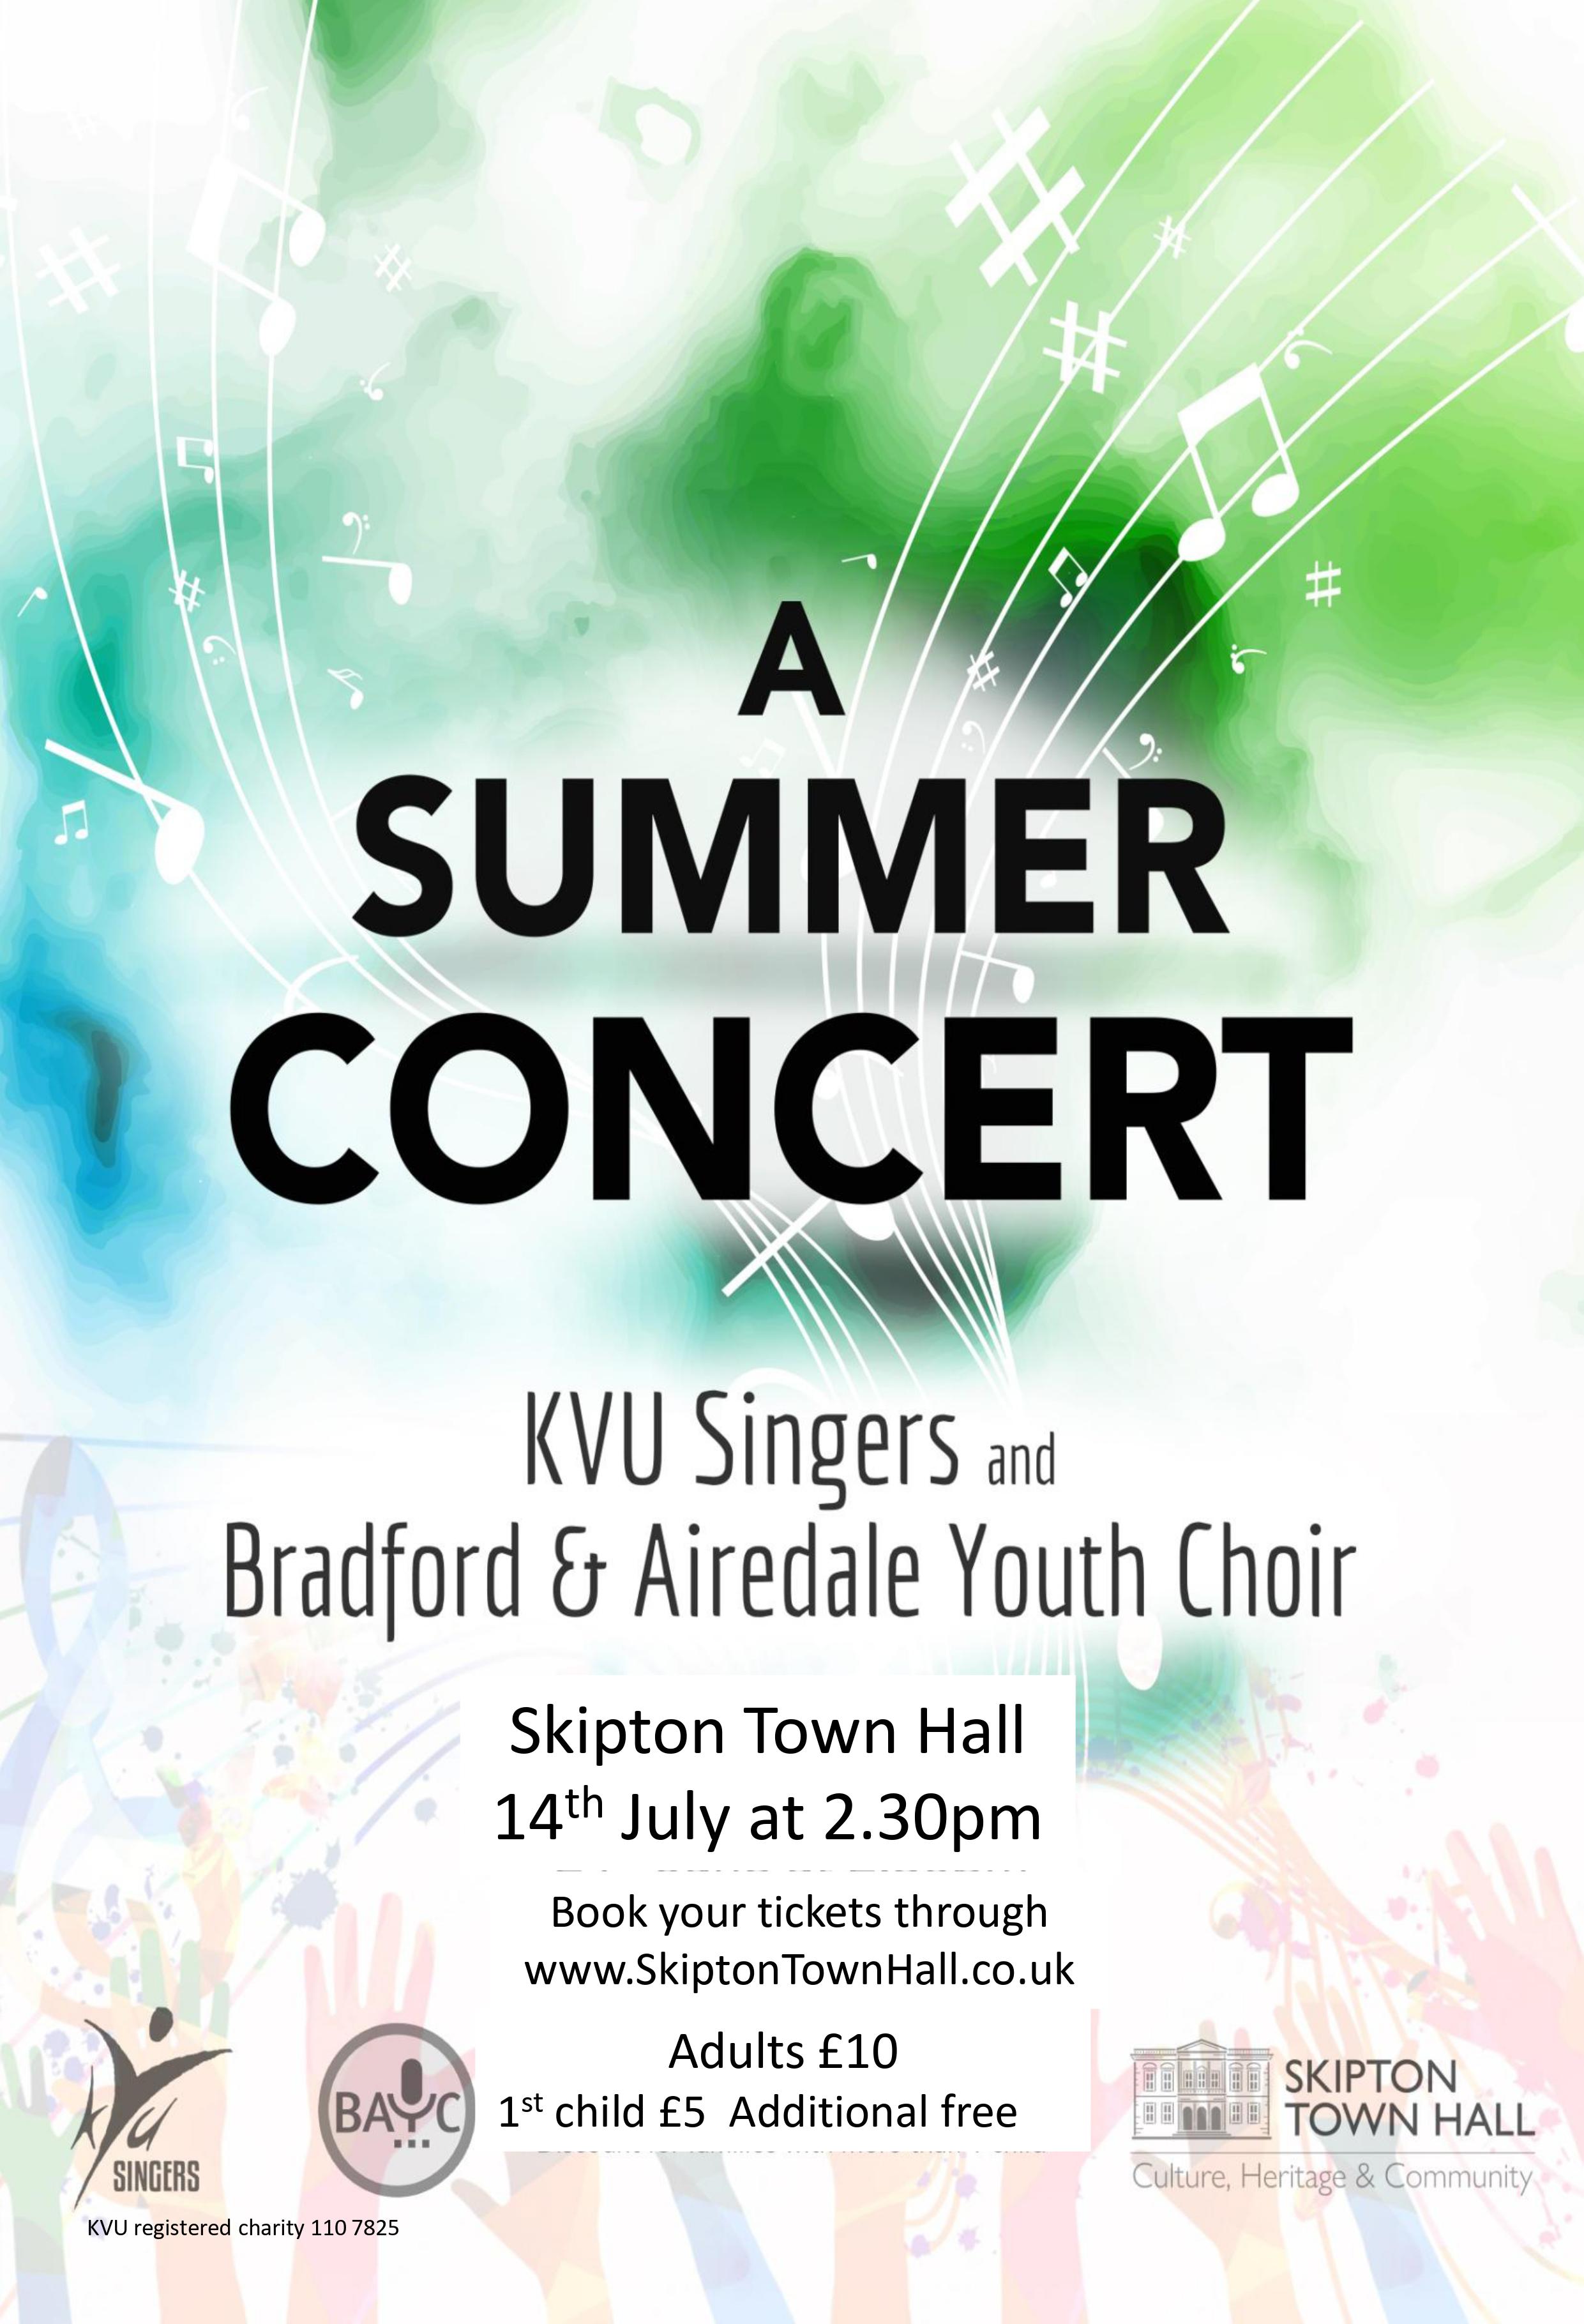 A SUMMER CONCERT WITH BRADFORD AND AIREDALE YOUTH CHOIR